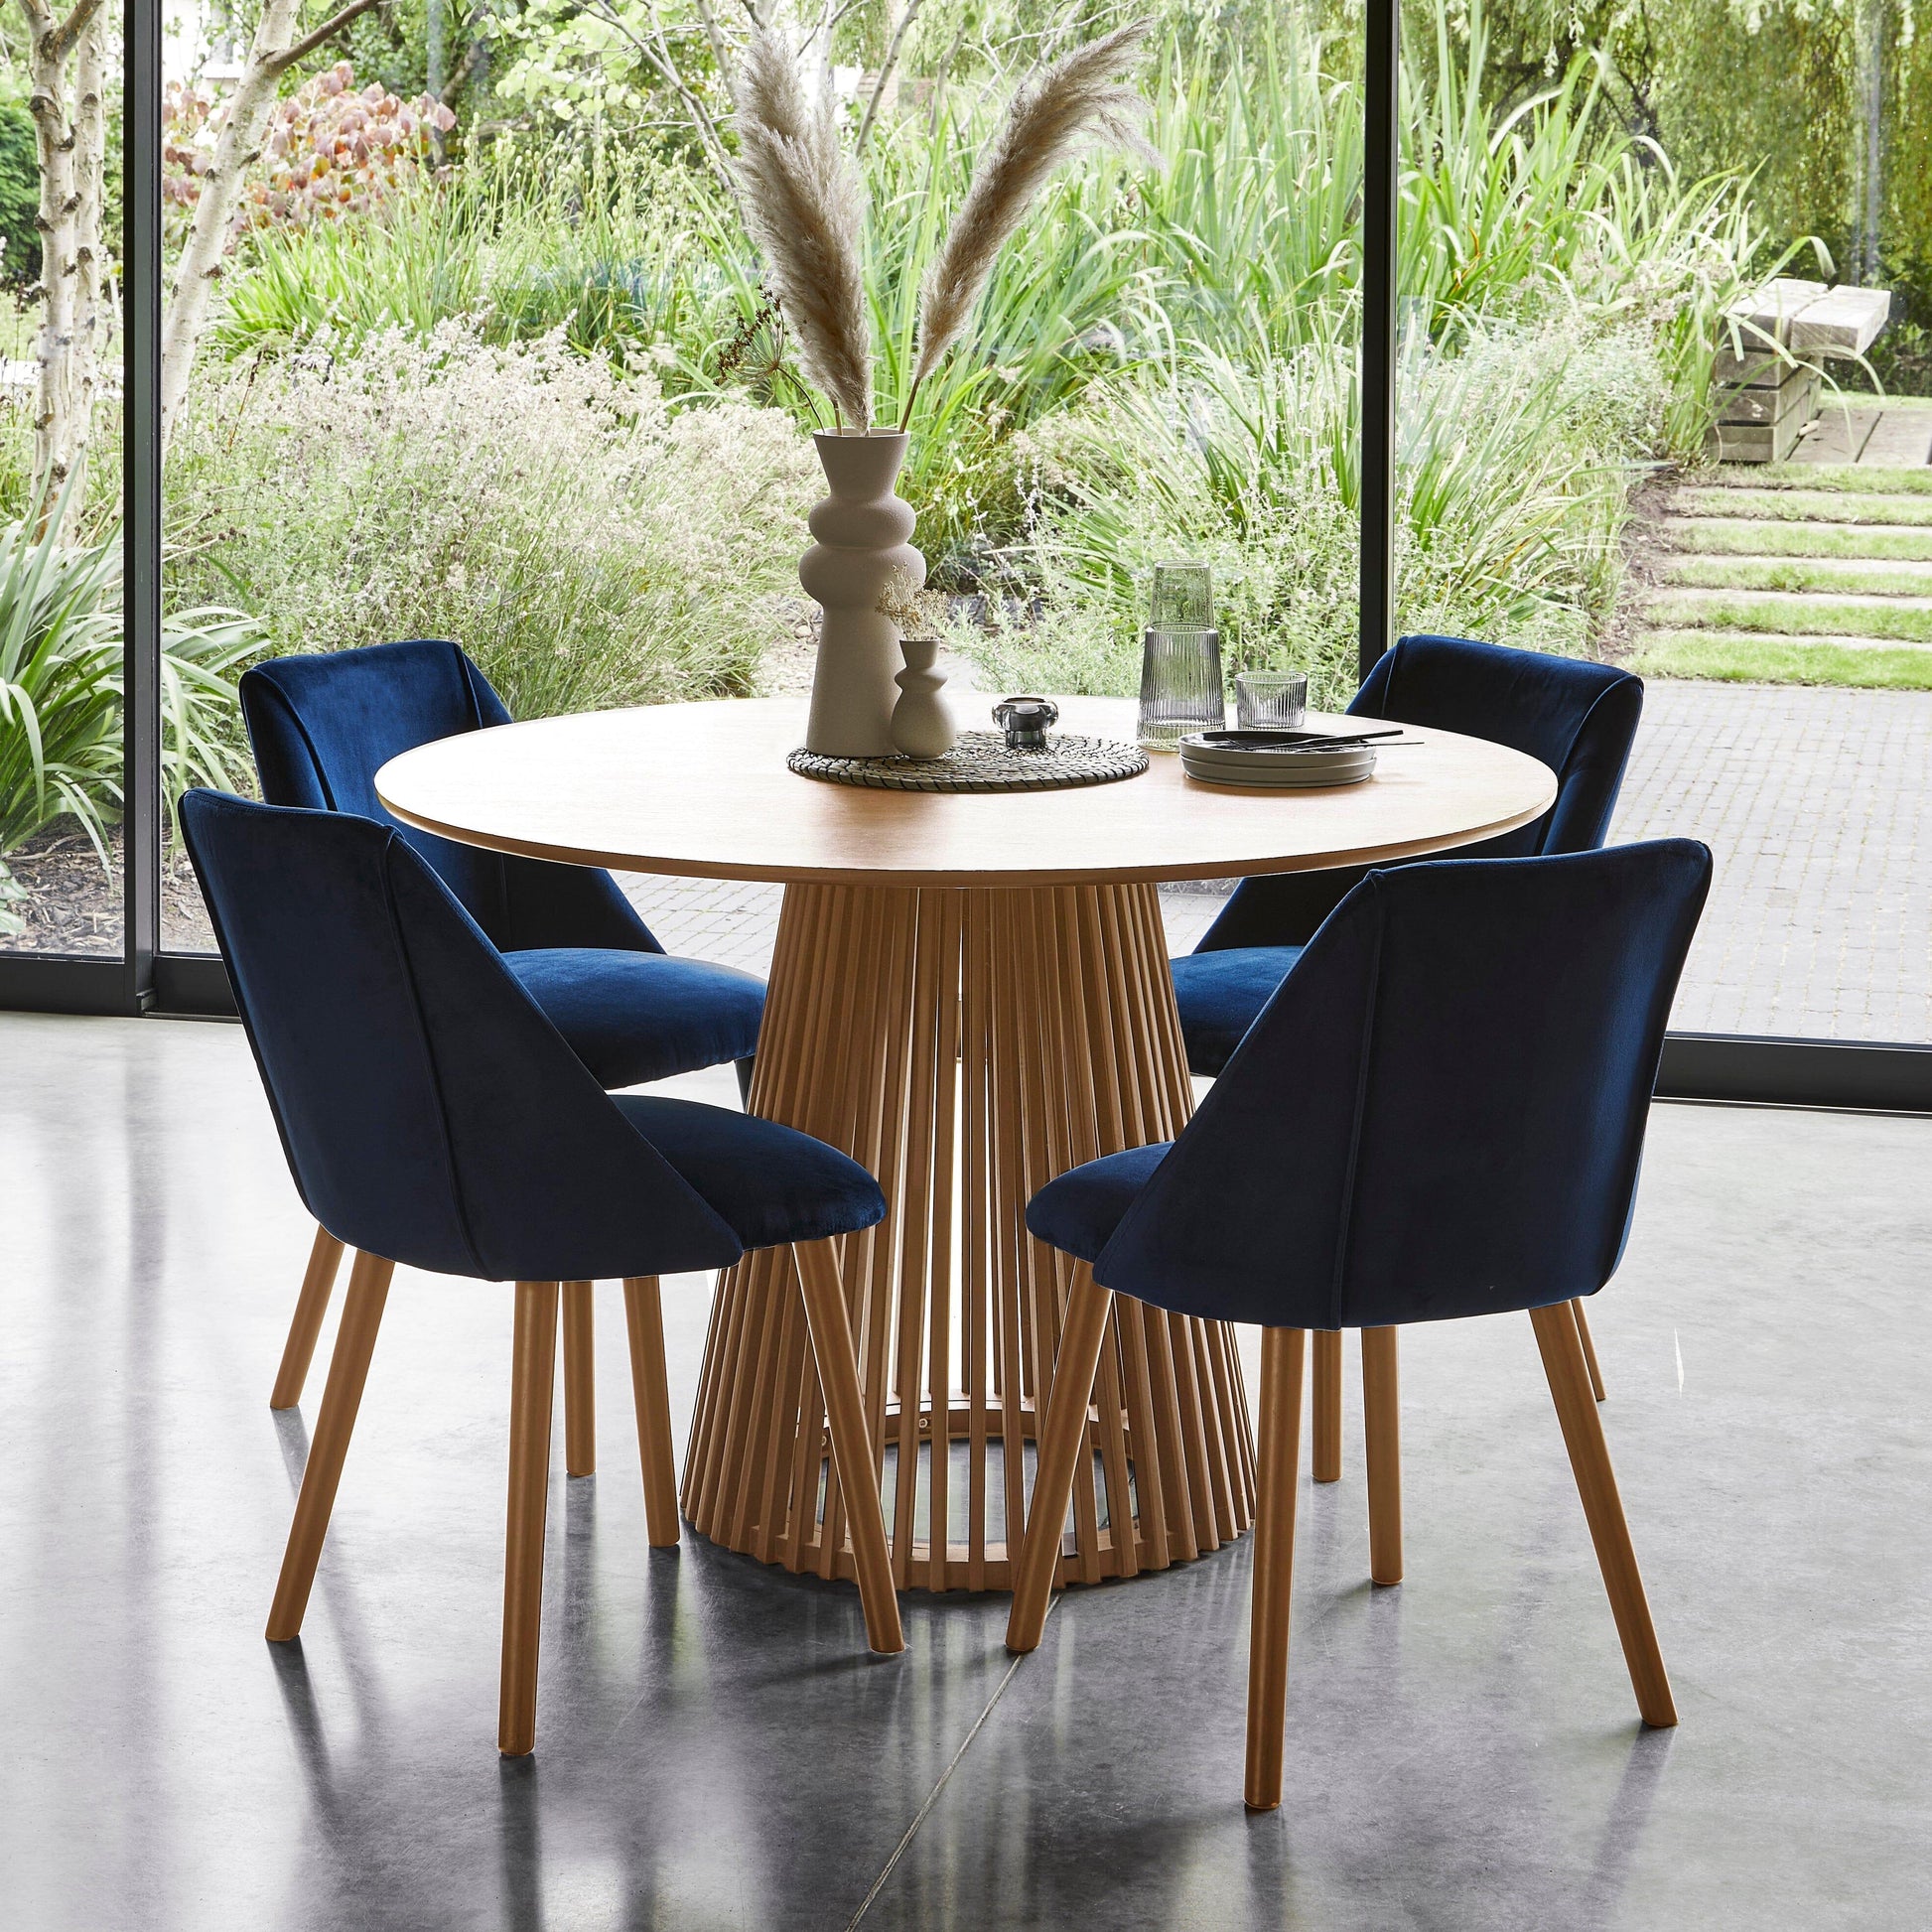 Willow 4 Seater Pale Oak Dining Table Set - Freya Blue Dining Chairs with Pale Oak Legs - Laura James